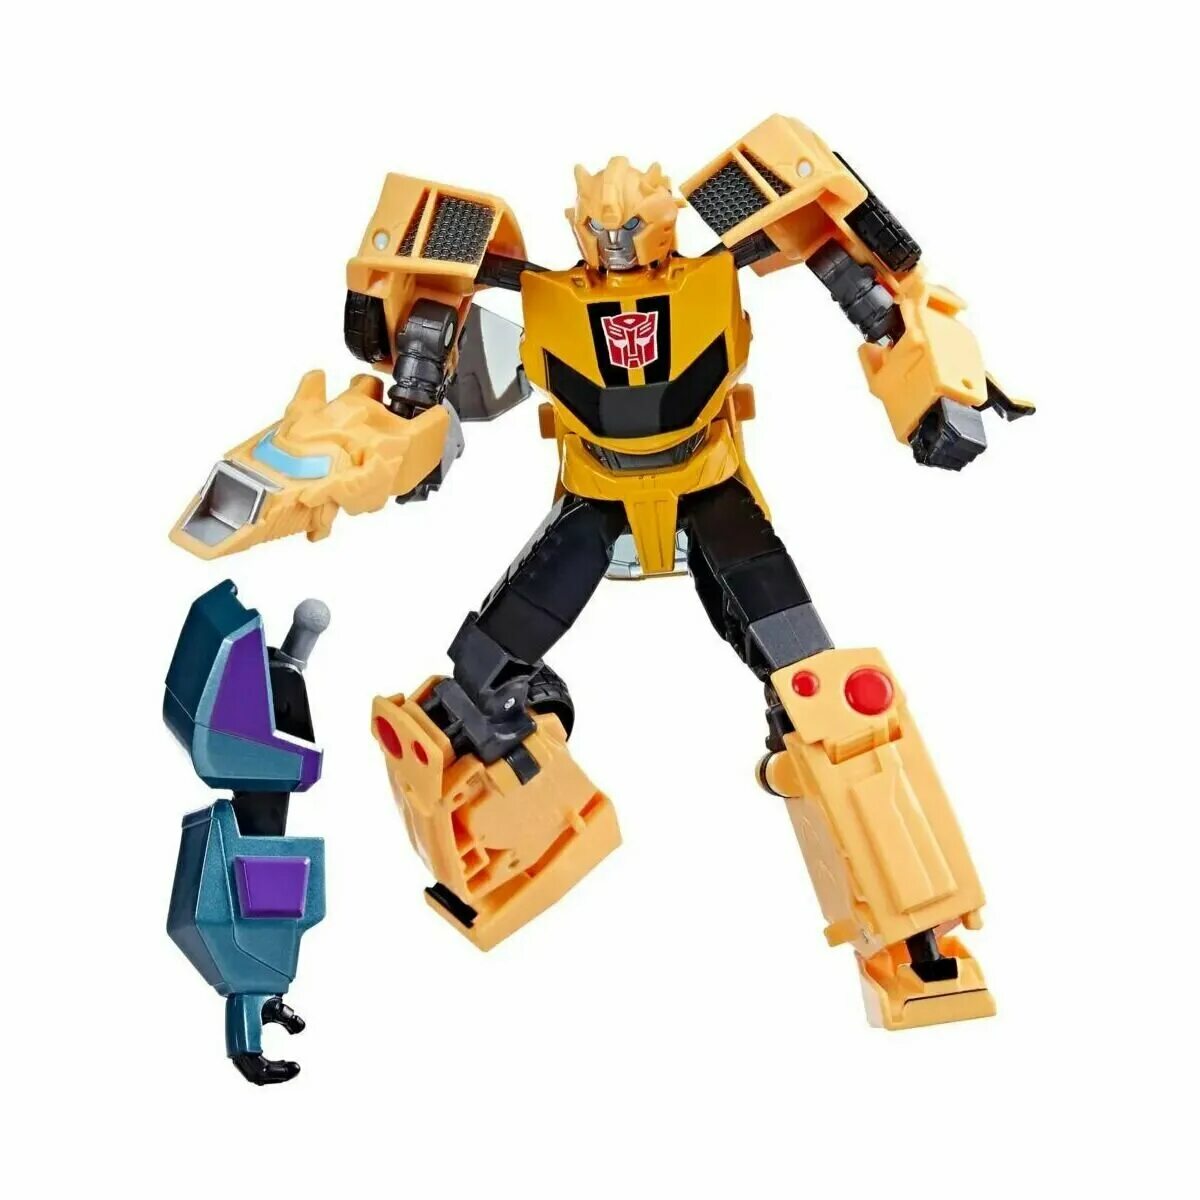 Transformers earthspark. Transformers EARTHSPARK Deluxe class Бамблби. Transformers Earth Spark Toys. Игрушка Transformers интерактивная Бамблби f19525e0. Робот Бамблби игрушка.